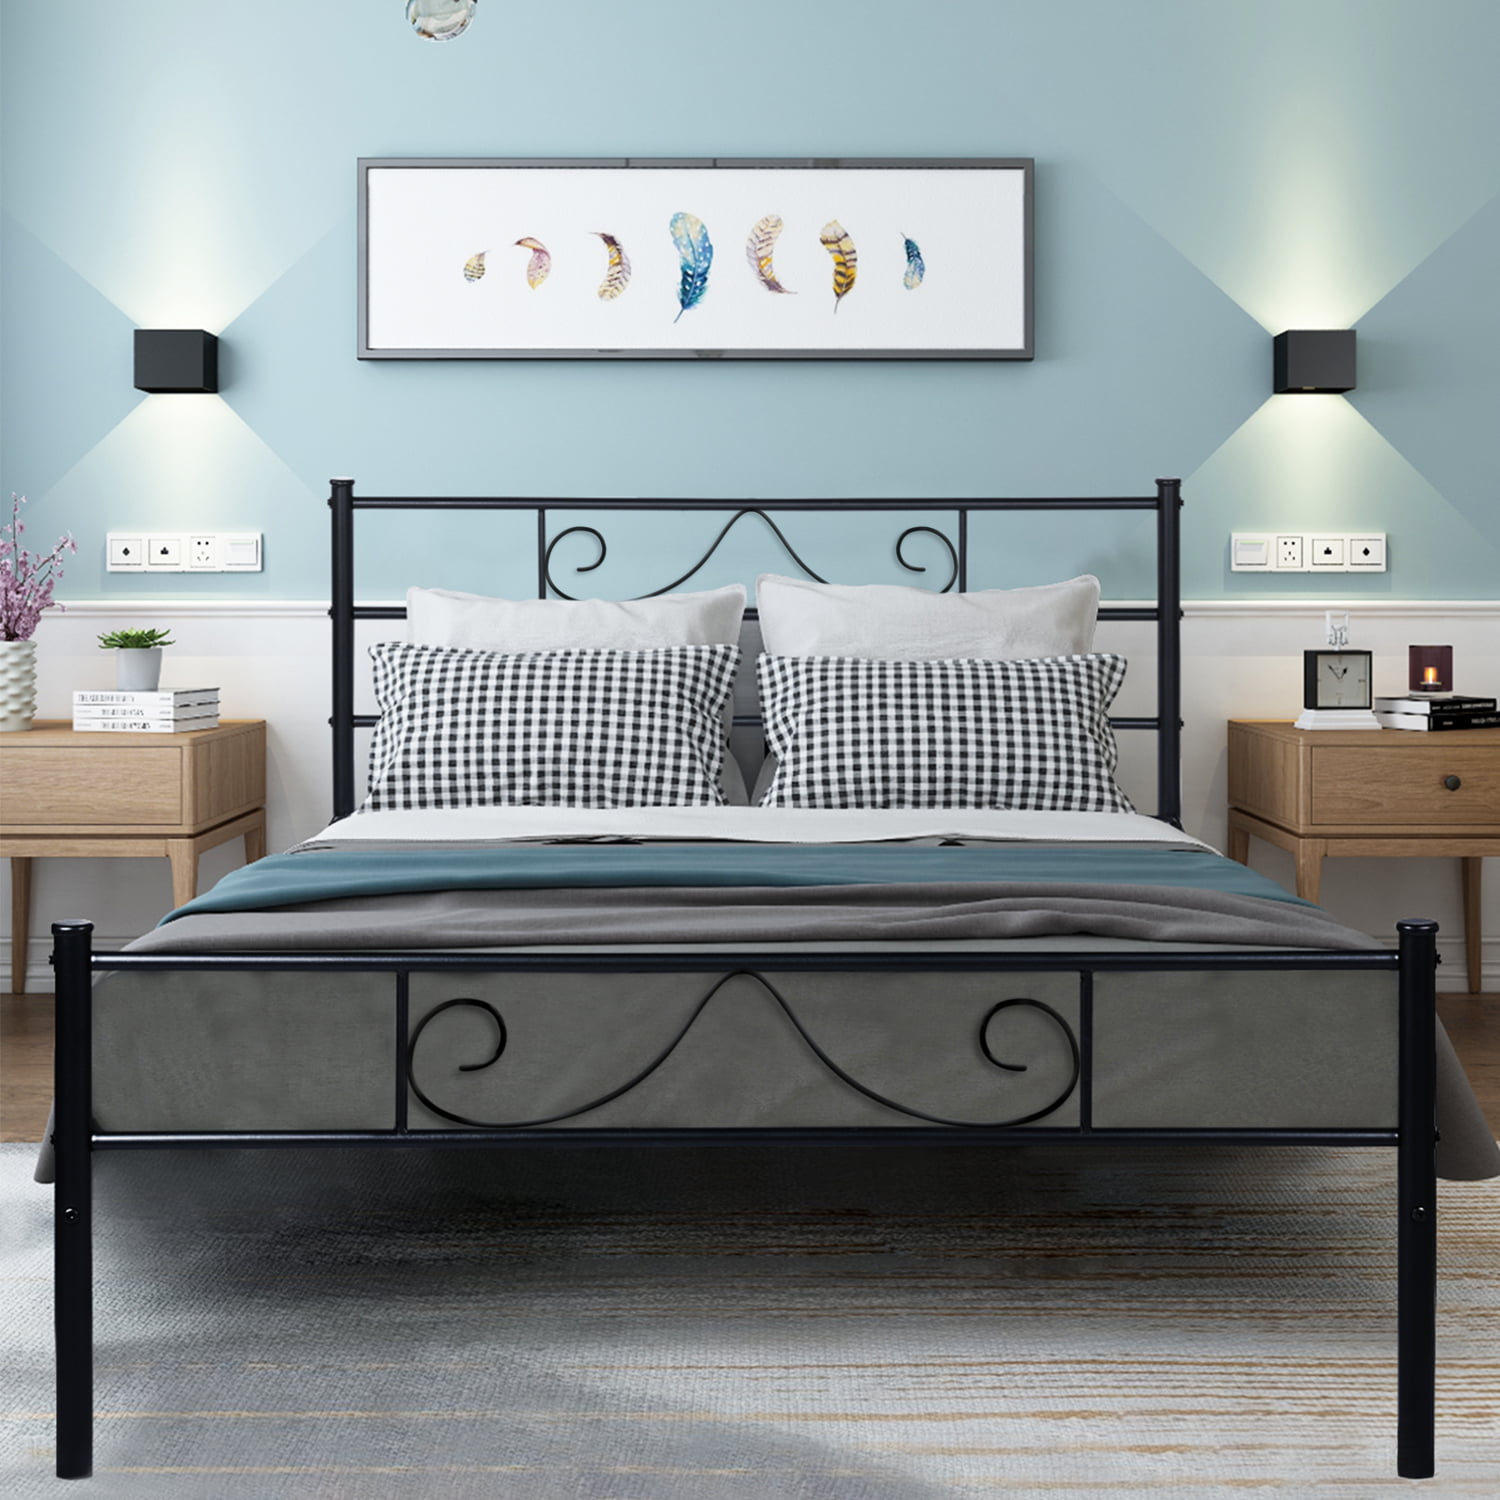 Aingoo Bed Frame Full Size with Headboard and Stable Metal ...